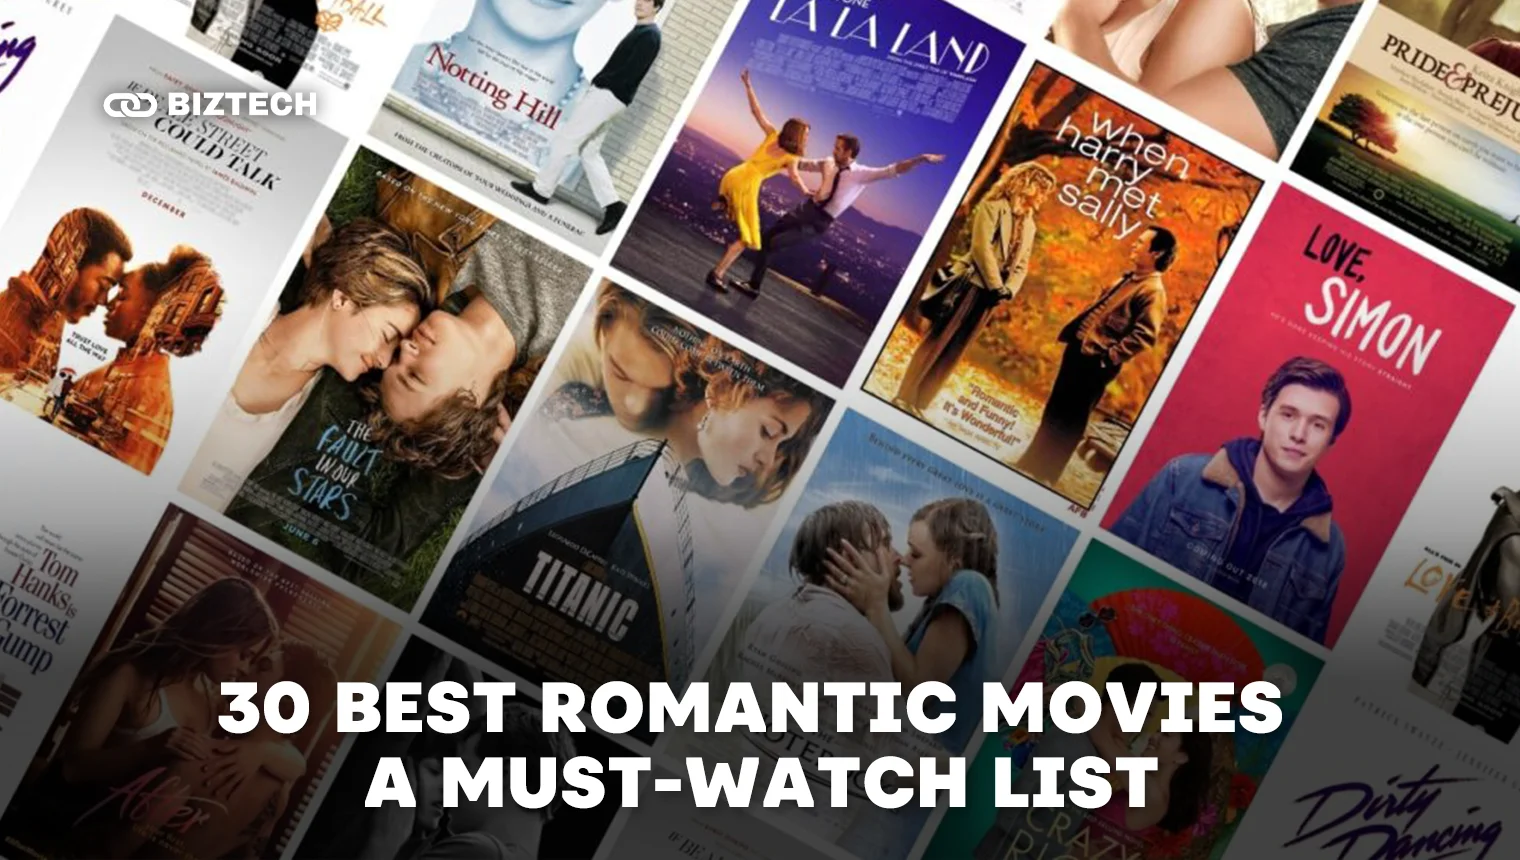 Top 30 Romantic Movies: Classic and Modern Must-Watch Films